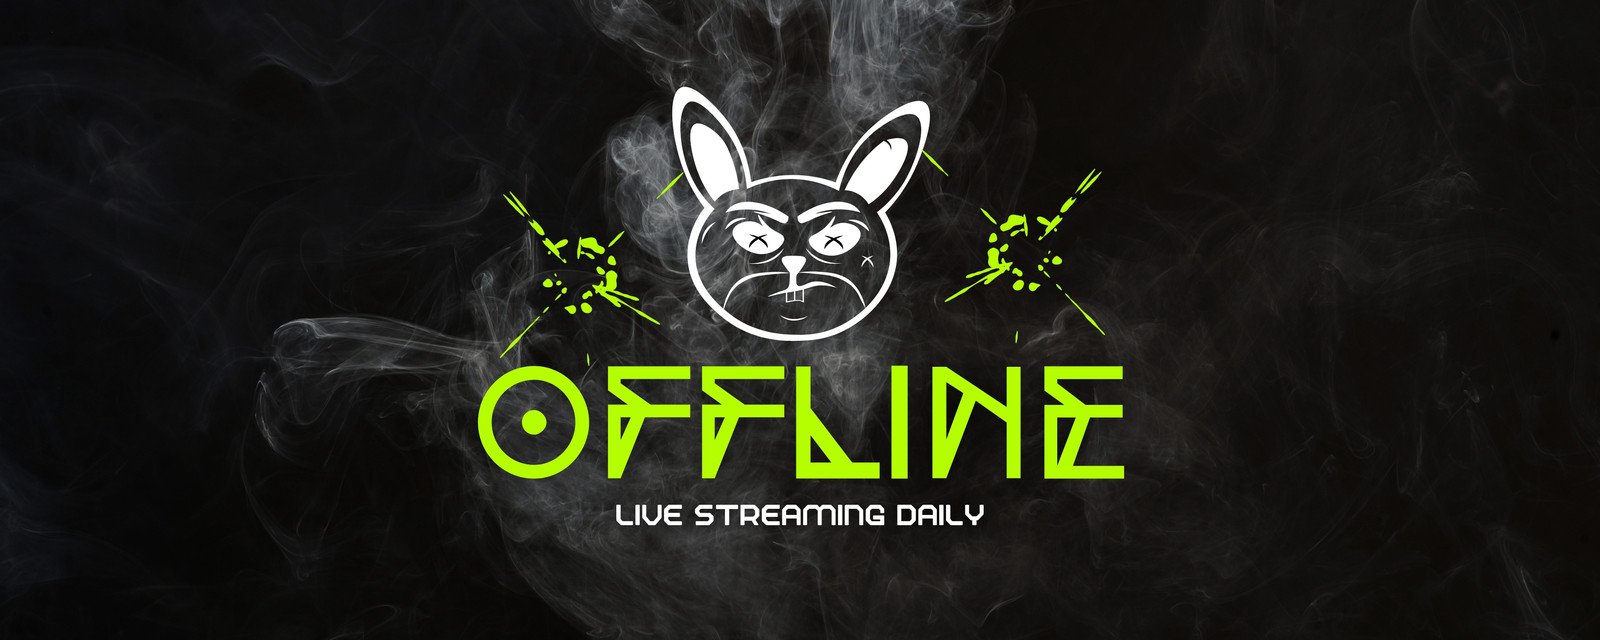 Placeit - Twitch Offline Banner Design Template for Just Chatting